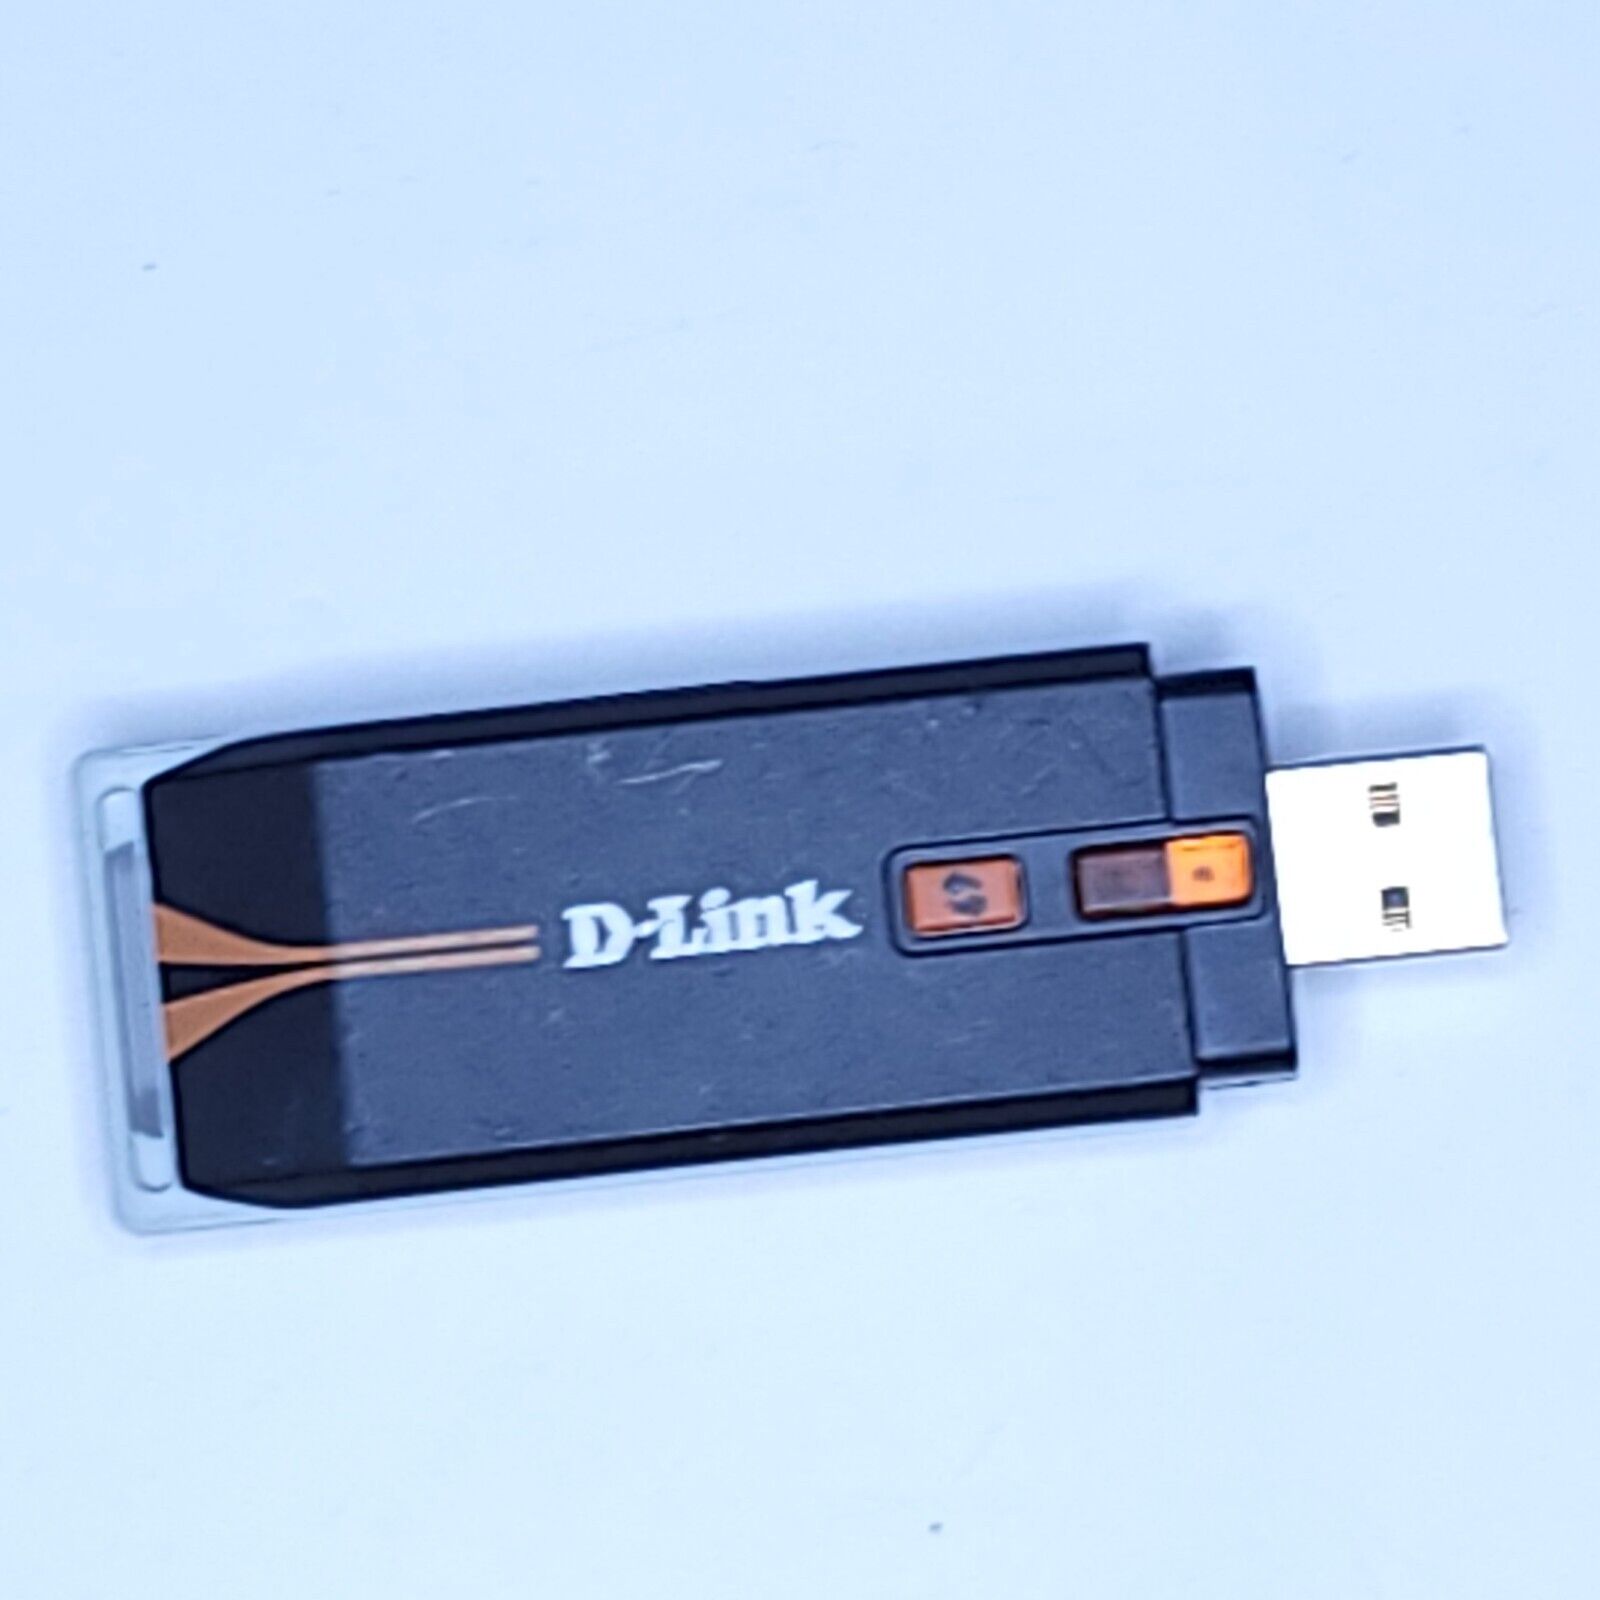 D-link DWA-125 Wireless-N 150 USB Adapter Tested Working